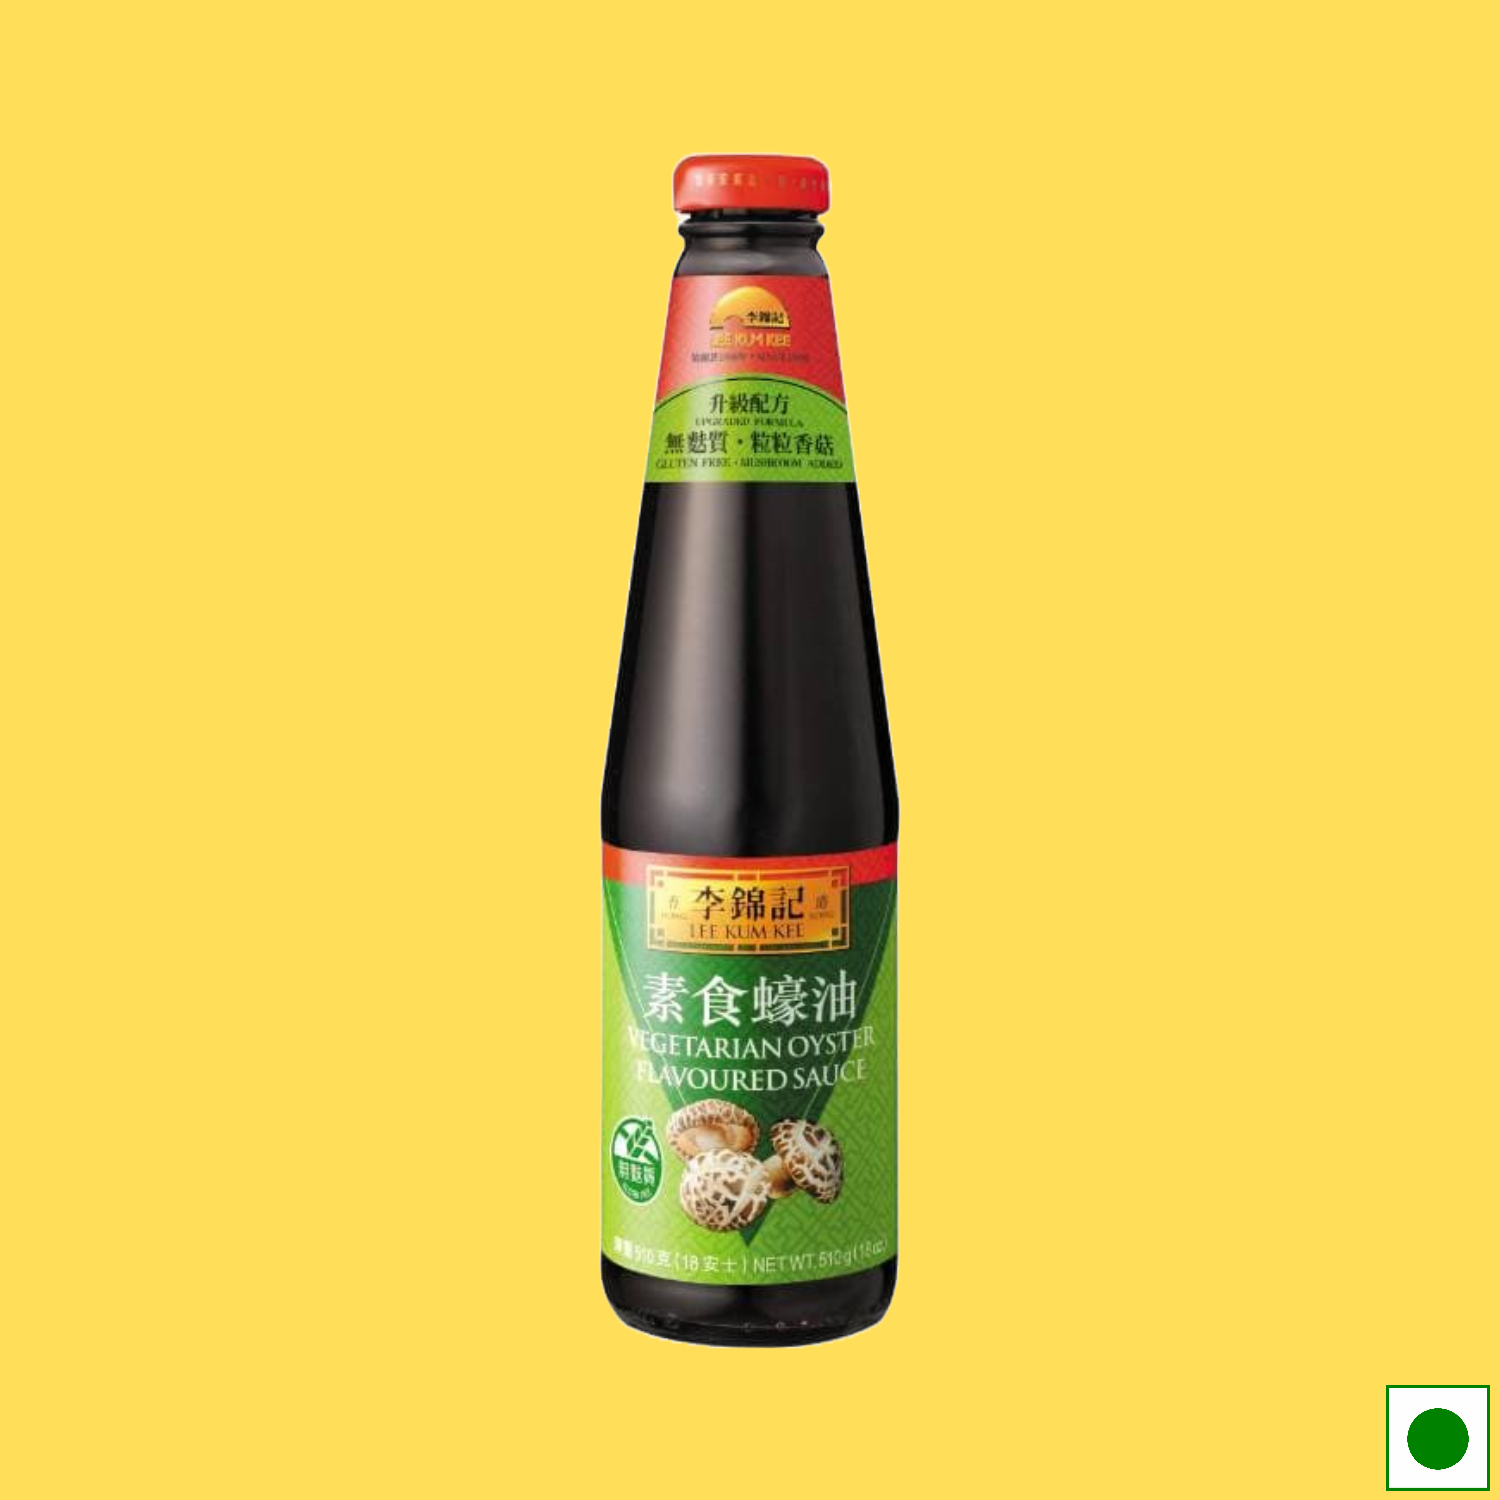 Lee Kum Kee Vegetarian Oyster Flavoured Sauce, 510g (Imported)